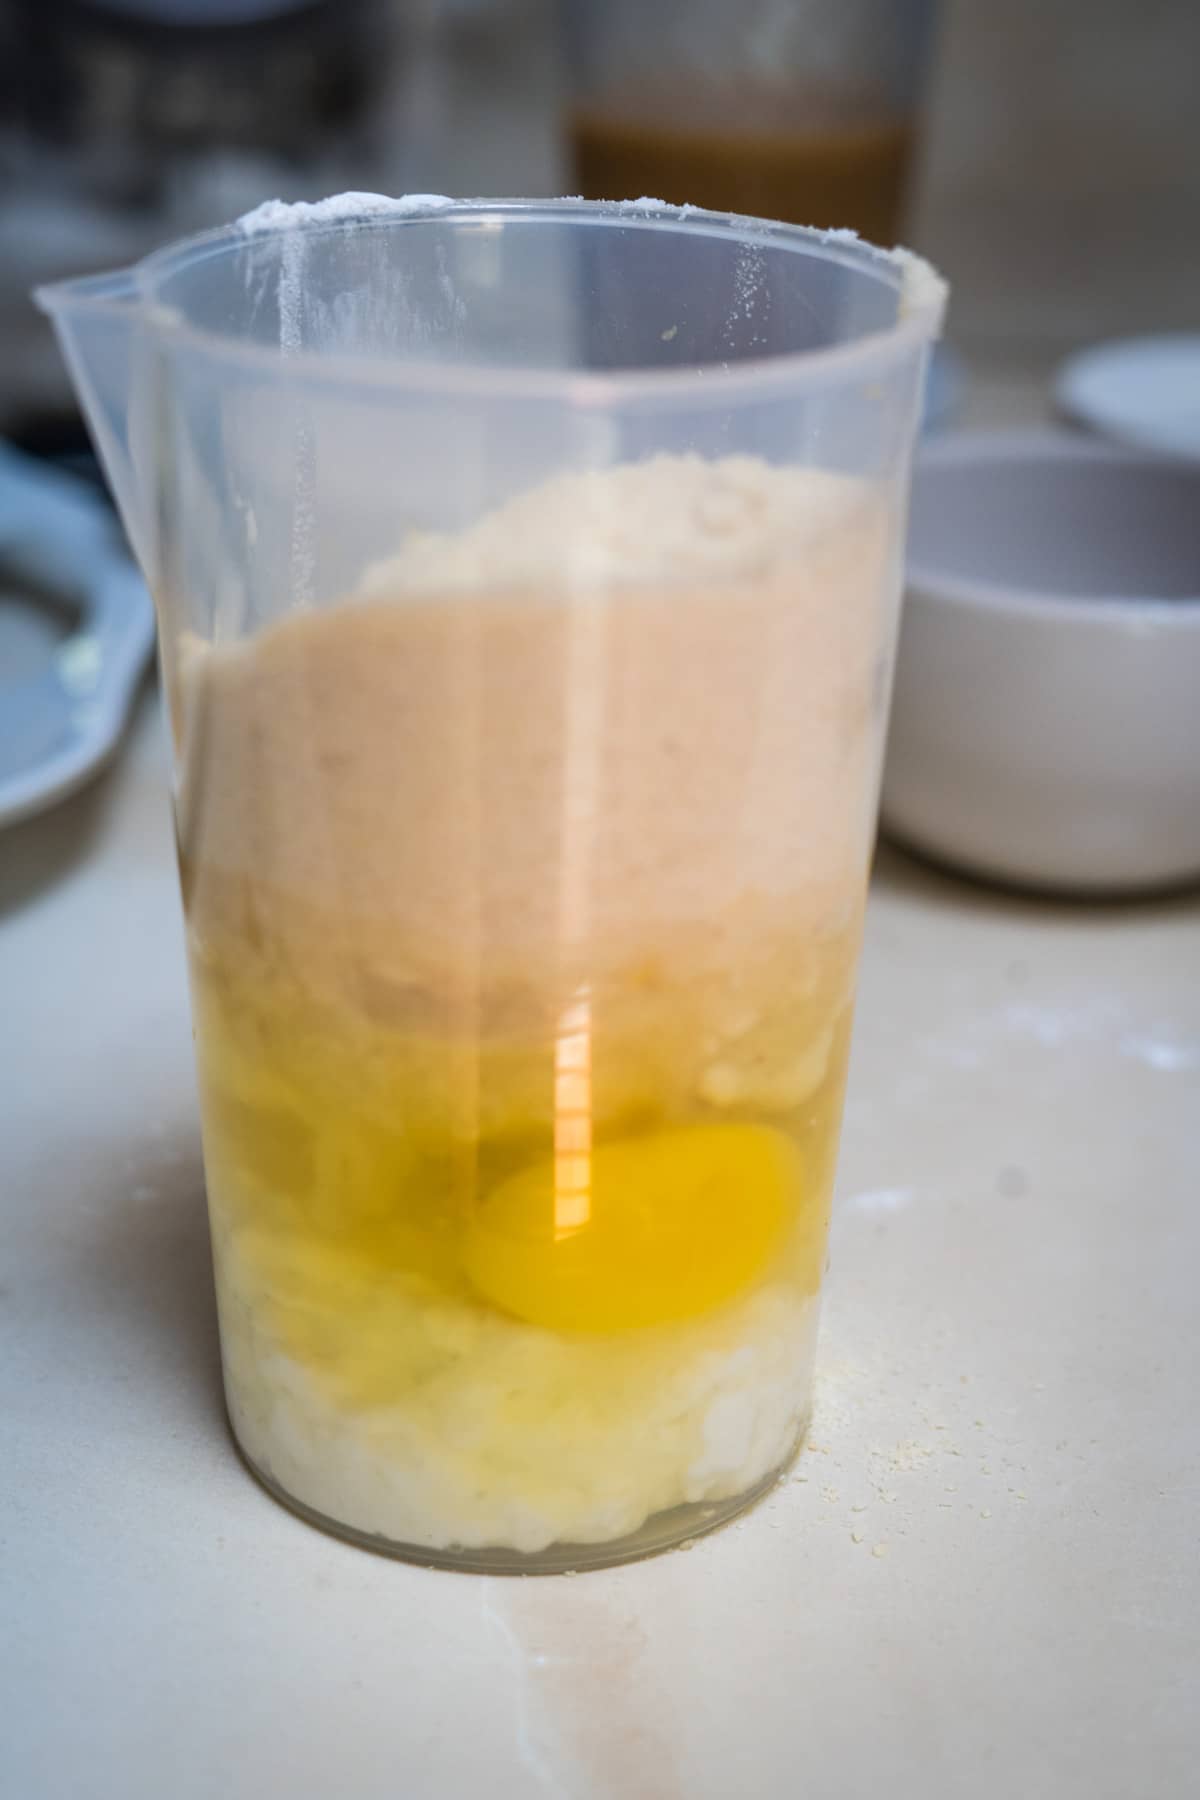 pancake batter in container.